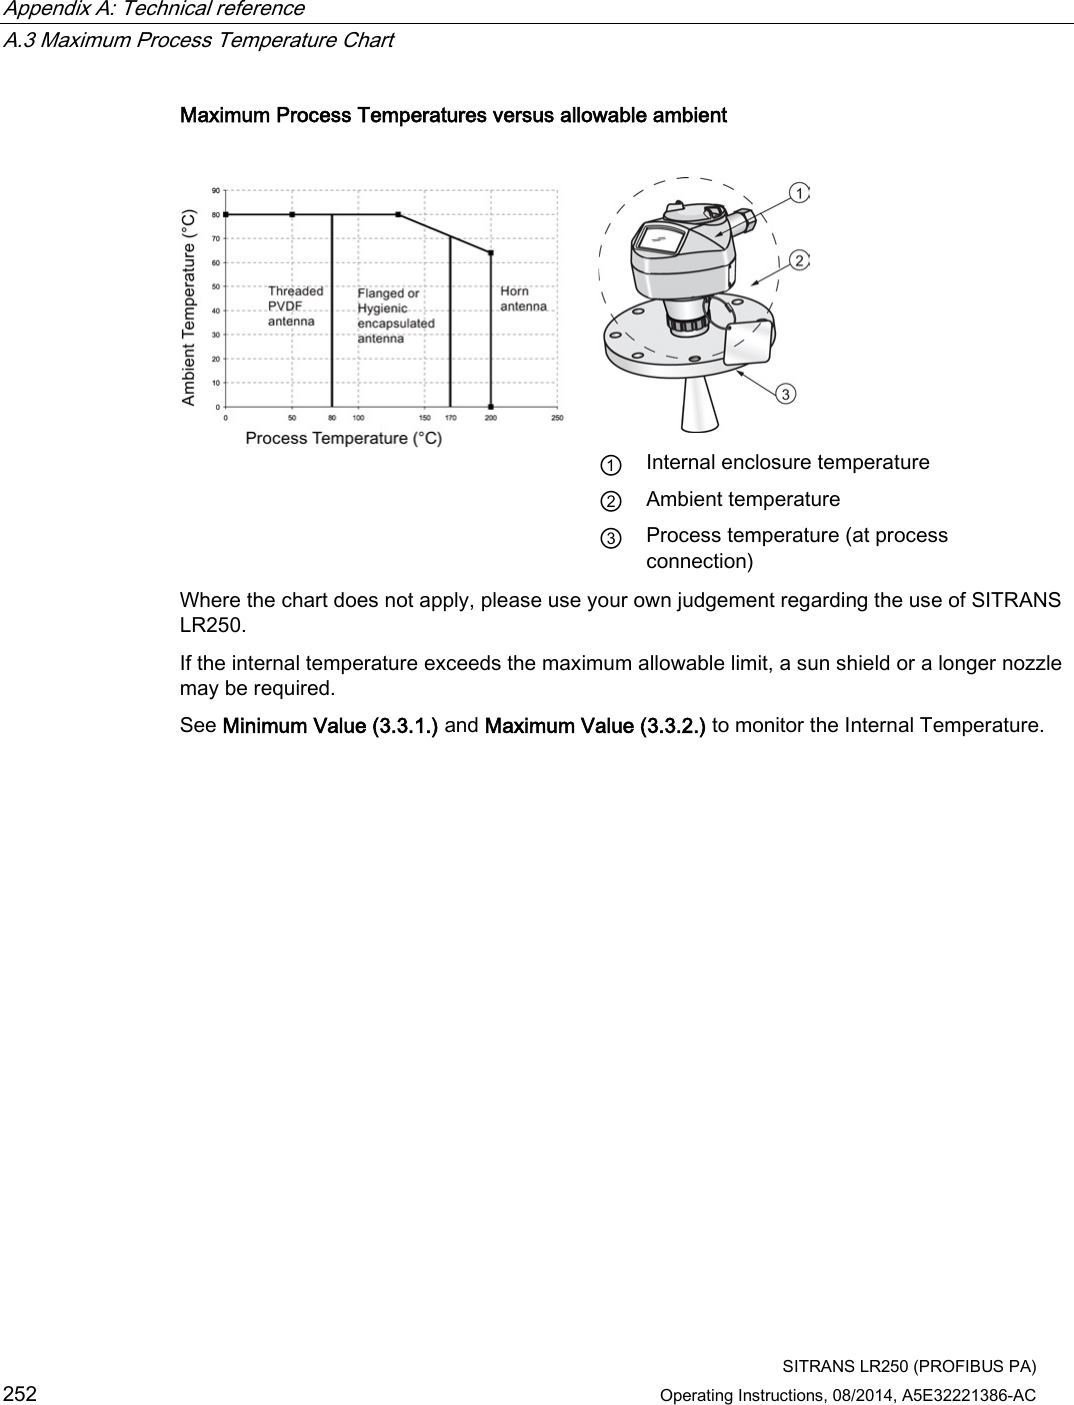 Appendix A: Technical reference   A.3 Maximum Process Temperature Chart  SITRANS LR250 (PROFIBUS PA) 252 Operating Instructions, 08/2014, A5E32221386-AC Maximum Process Temperatures versus allowable ambient    ① Internal enclosure temperature ② Ambient temperature ③ Process temperature (at process connection) Where the chart does not apply, please use your own judgement regarding the use of SITRANS LR250. If the internal temperature exceeds the maximum allowable limit, a sun shield or a longer nozzle may be required. See Minimum Value (3.3.1.) and Maximum Value (3.3.2.) to monitor the Internal Temperature. 